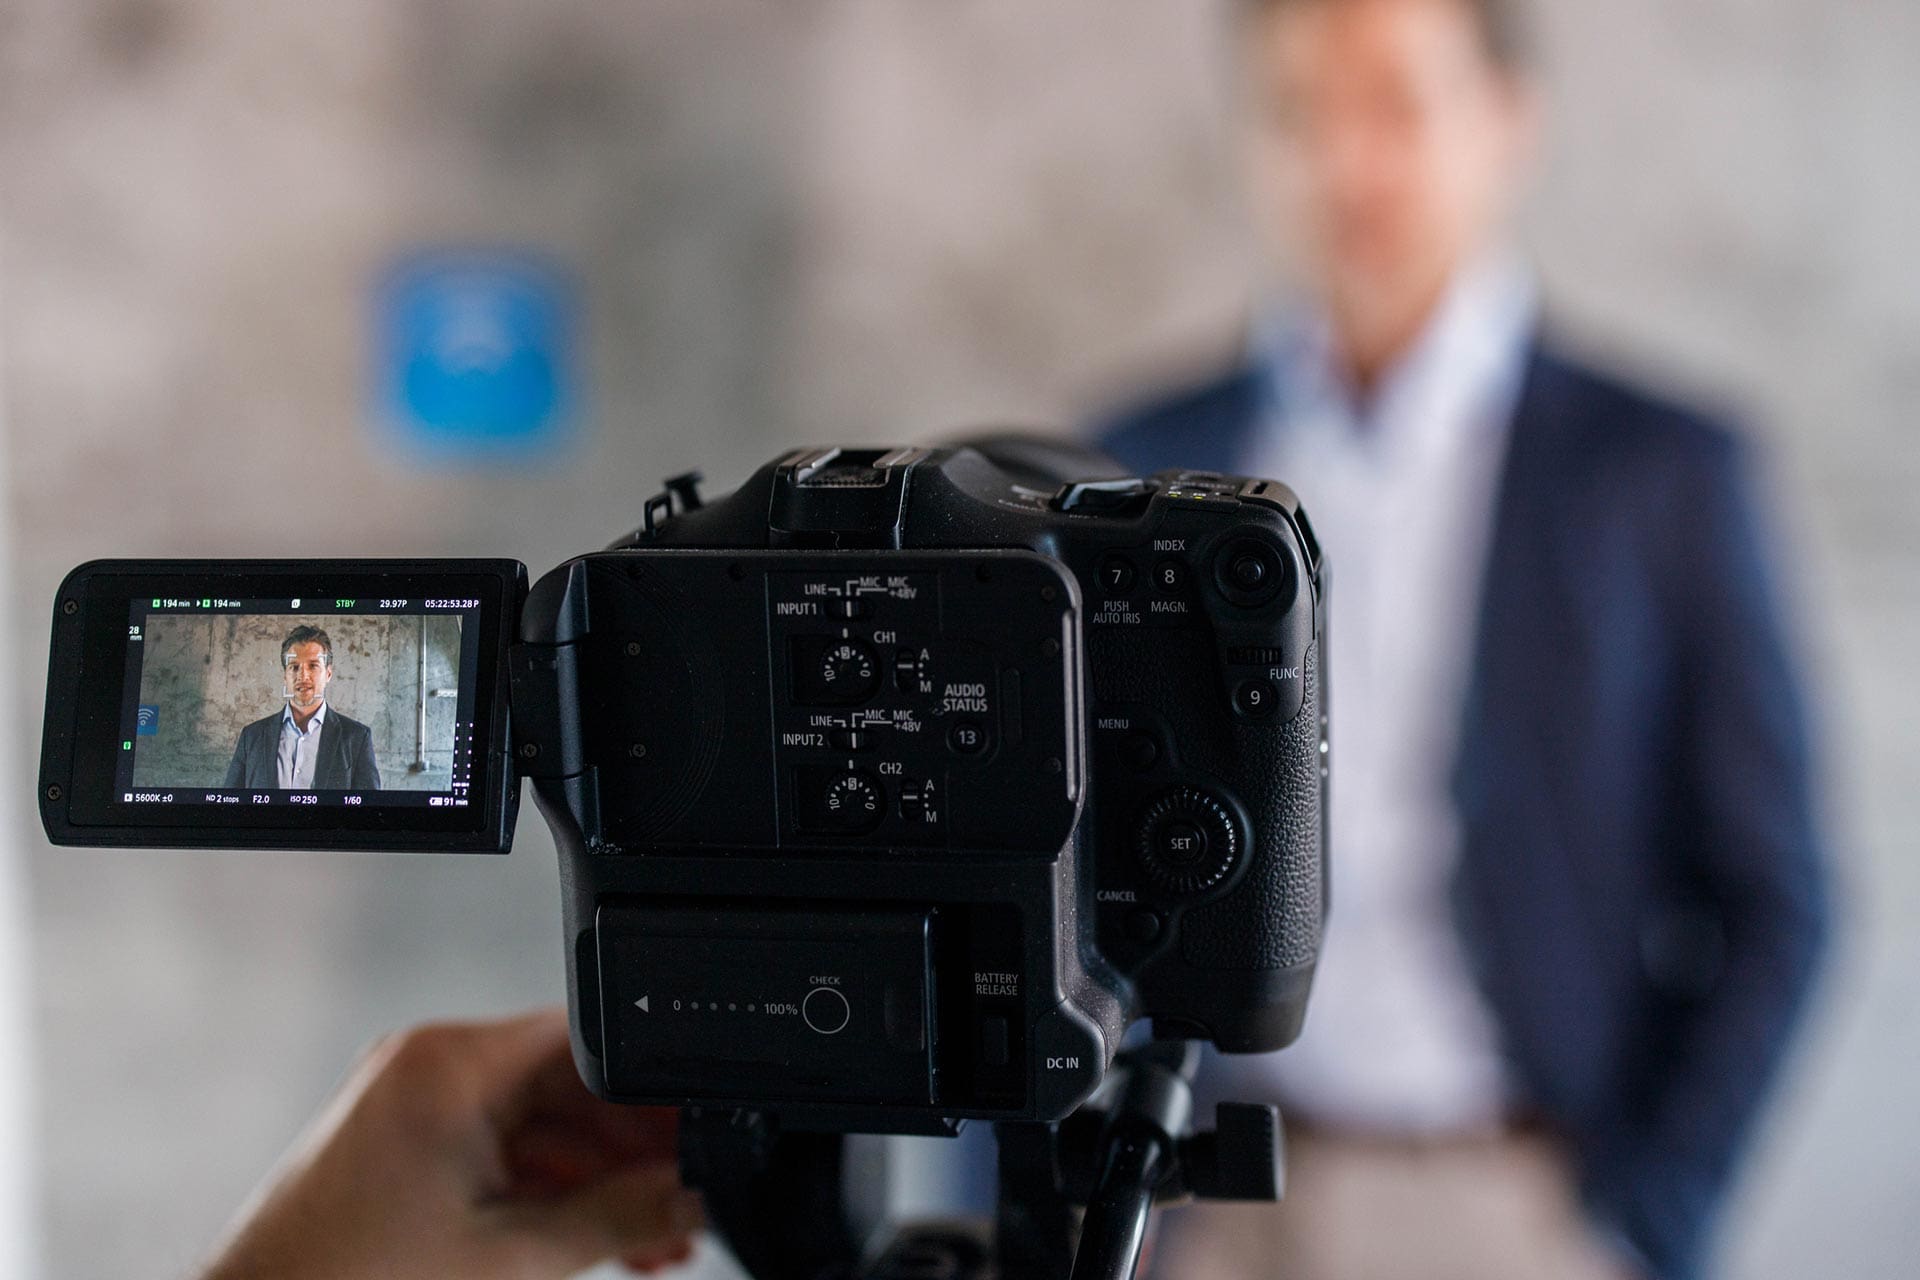 Creating Compelling Corporate Videos – Tips for Engaging Your Audience